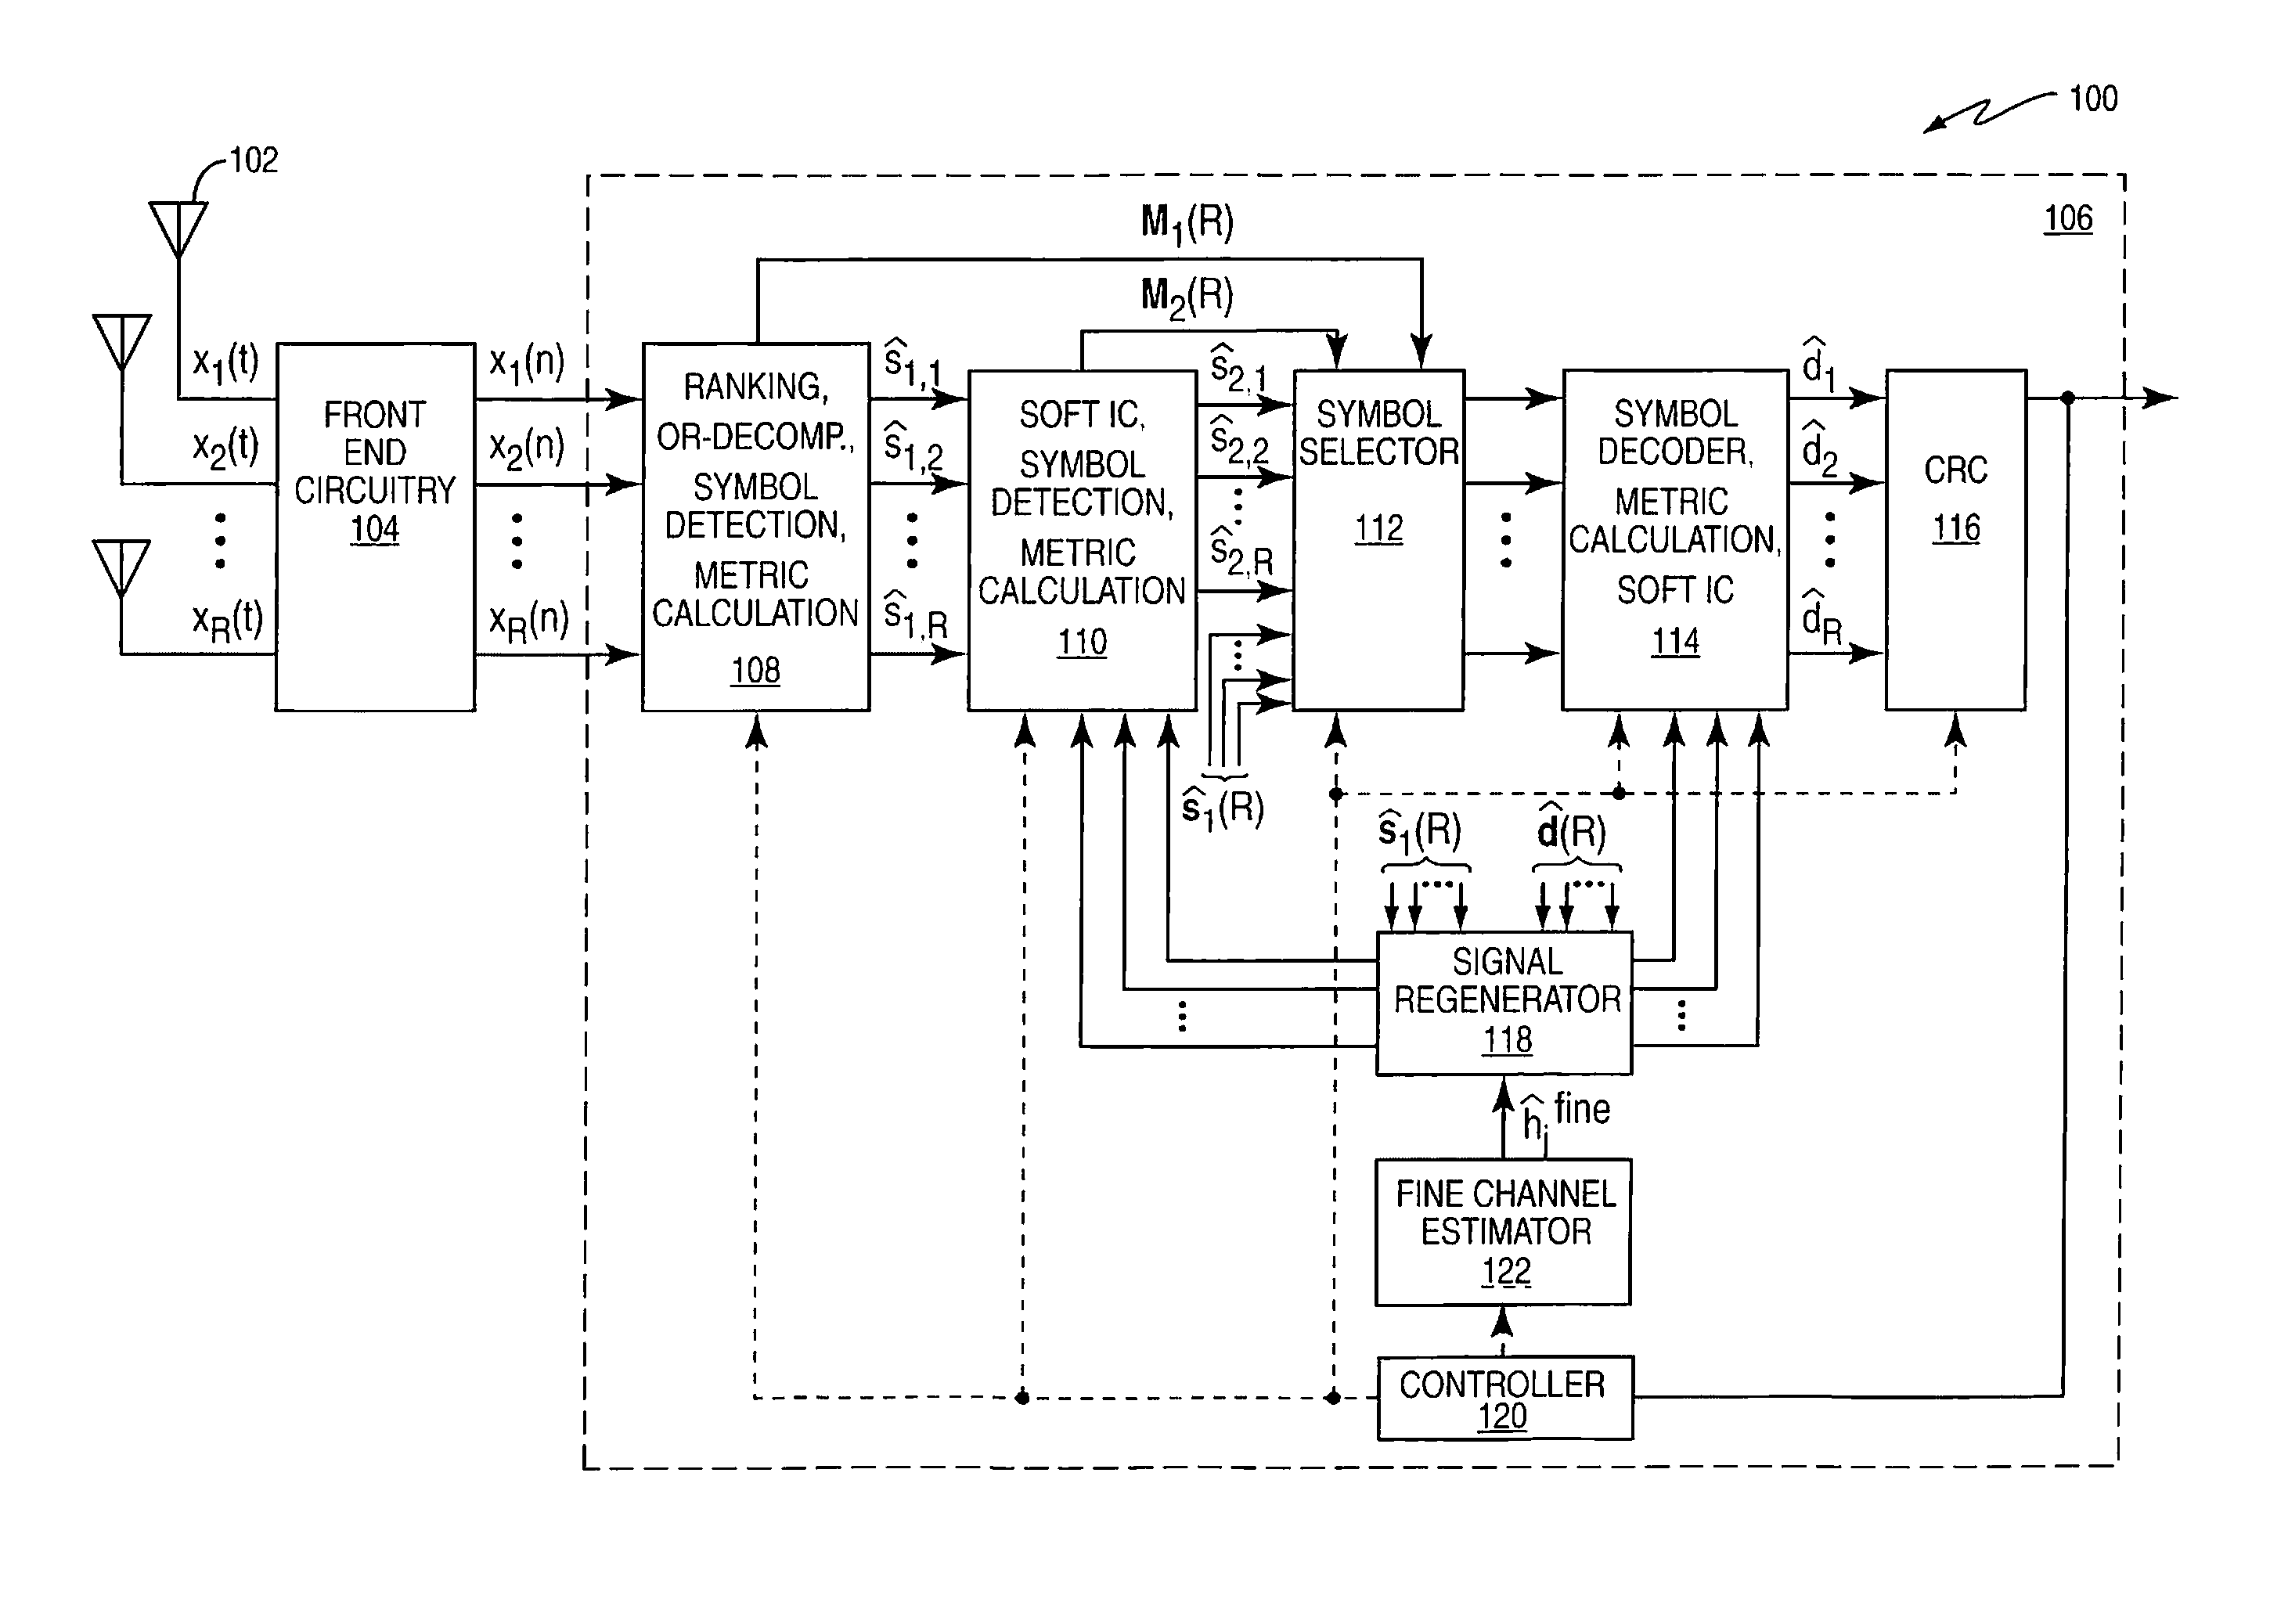 Multi-Antenna Receiver Interference Cancellation Method and Apparatus